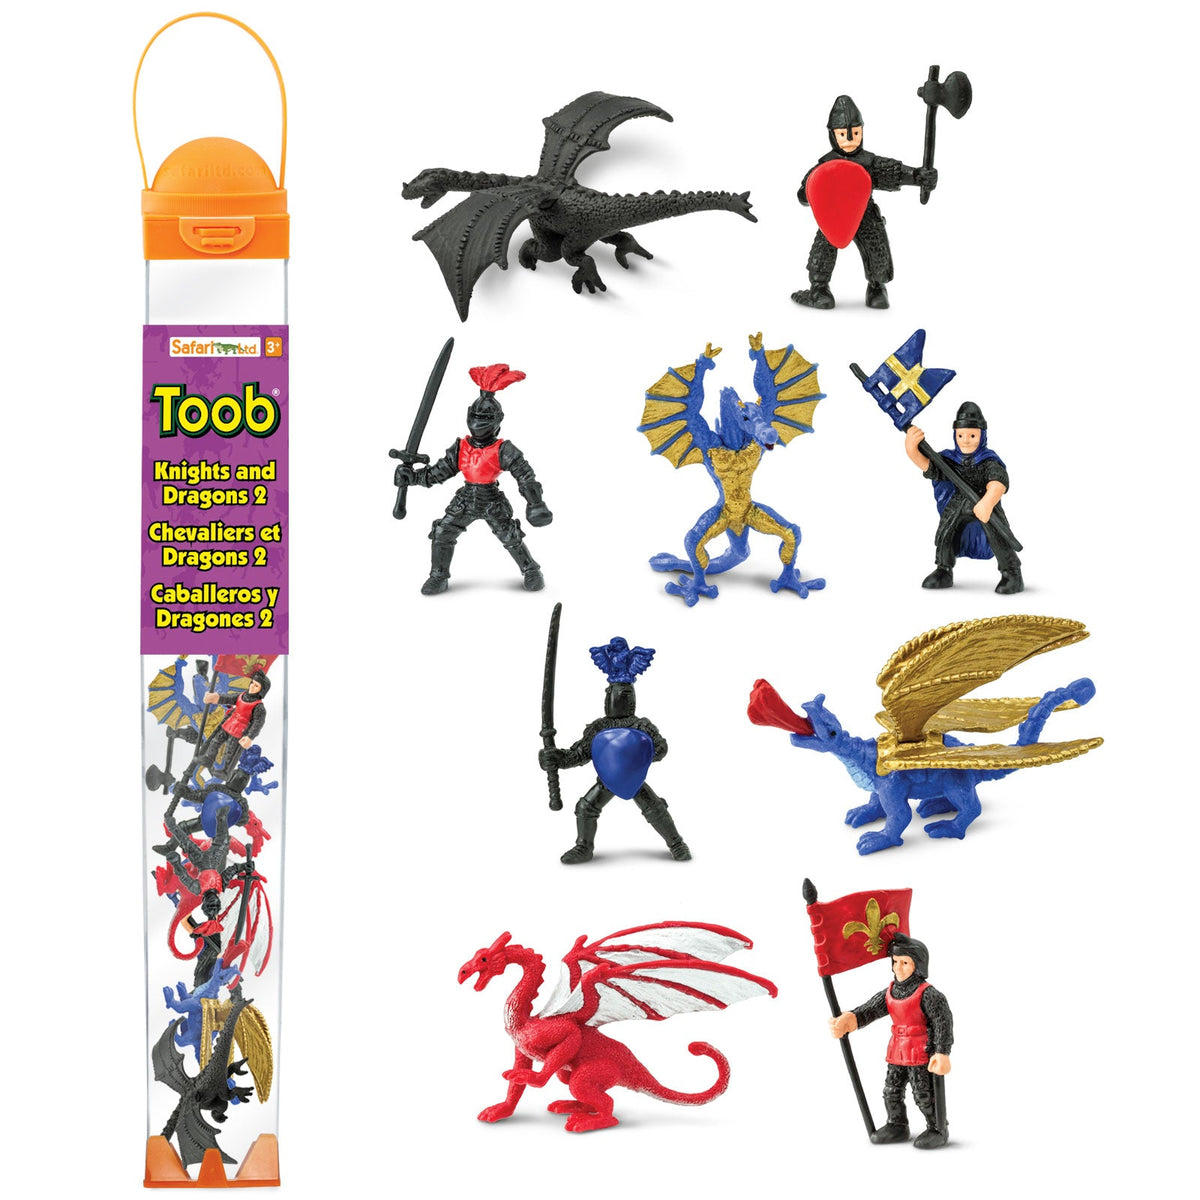 Safari Ltd. Knights & Dragons Toob - Set of 10 Mini Figurines: Red & Blue  Kingdom Knights, Catapult, and Green Dragon - History Learning Toy Figures